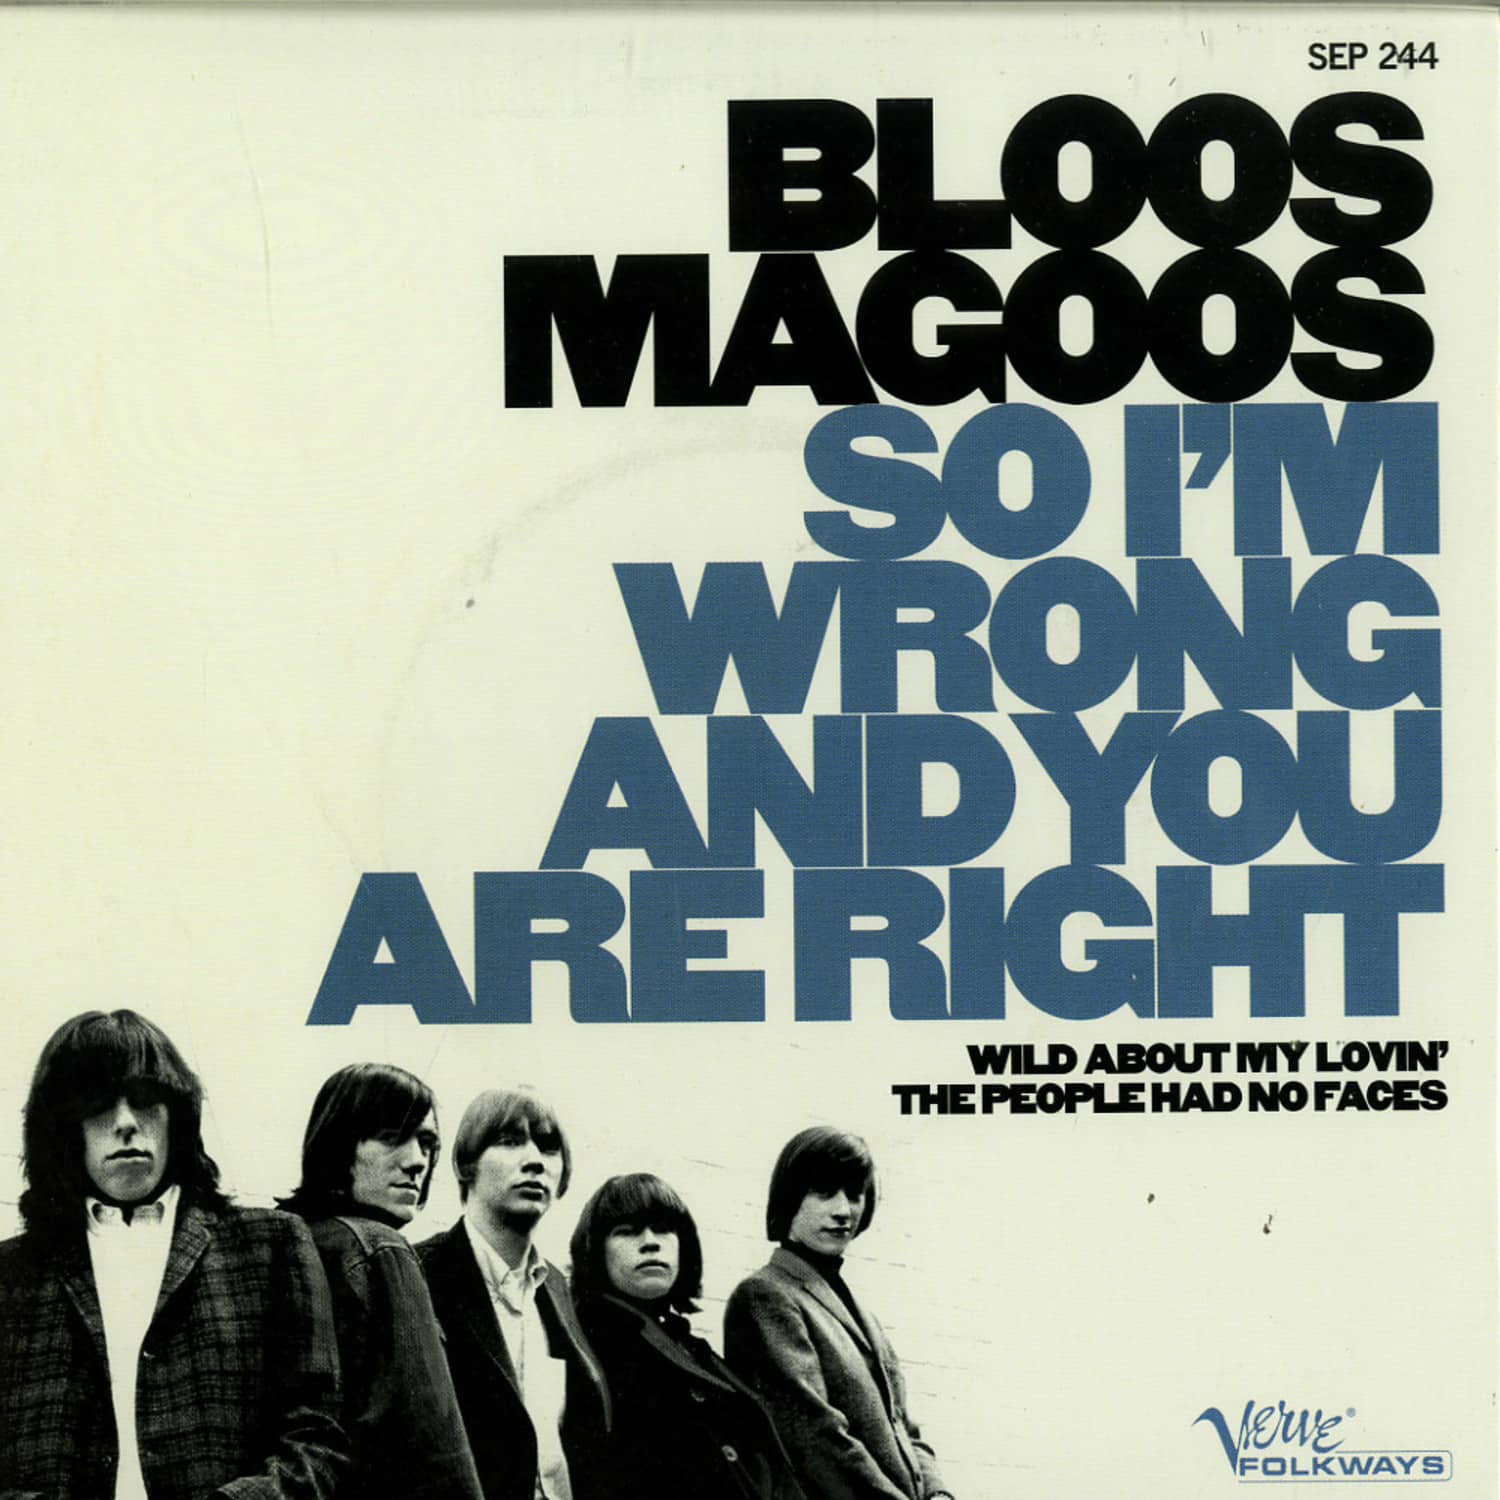 Blues Magoos - SO I M WRONG AND YOU ARE RIGHT 